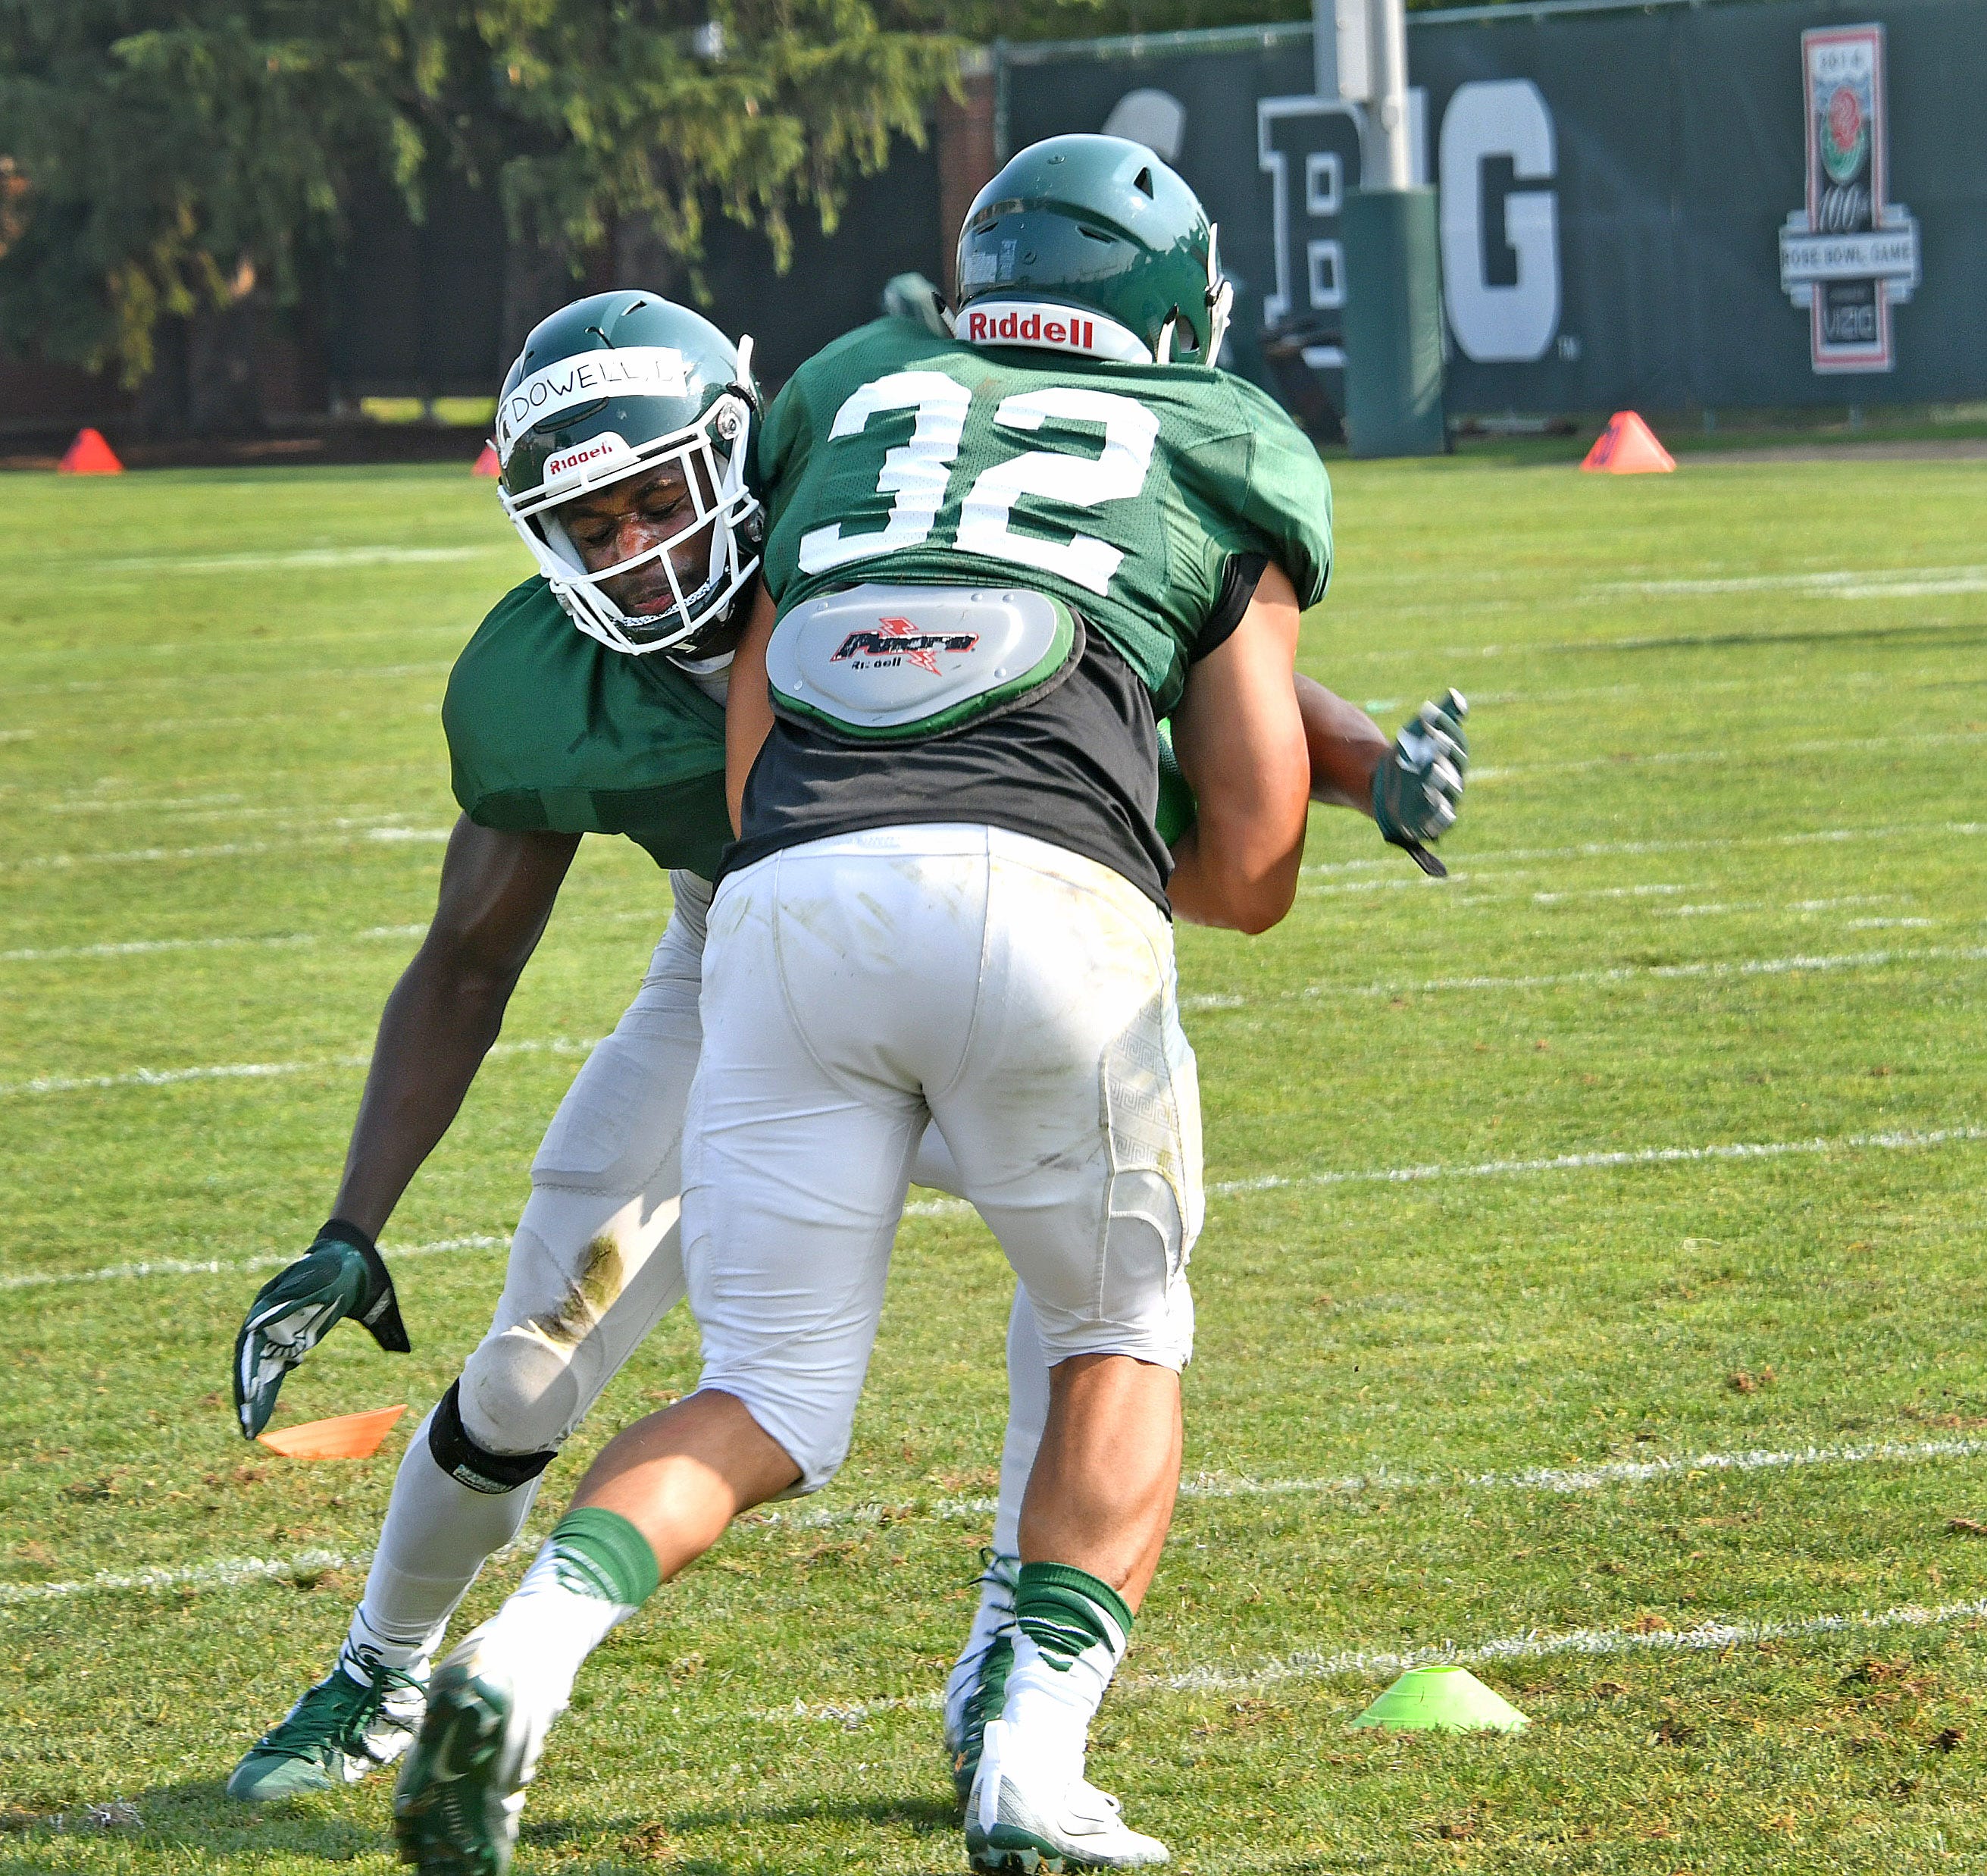 Michigan State linebacker Andrew Dowell puts a tackle on teammate Corey Pryor during a drill early in the practice.